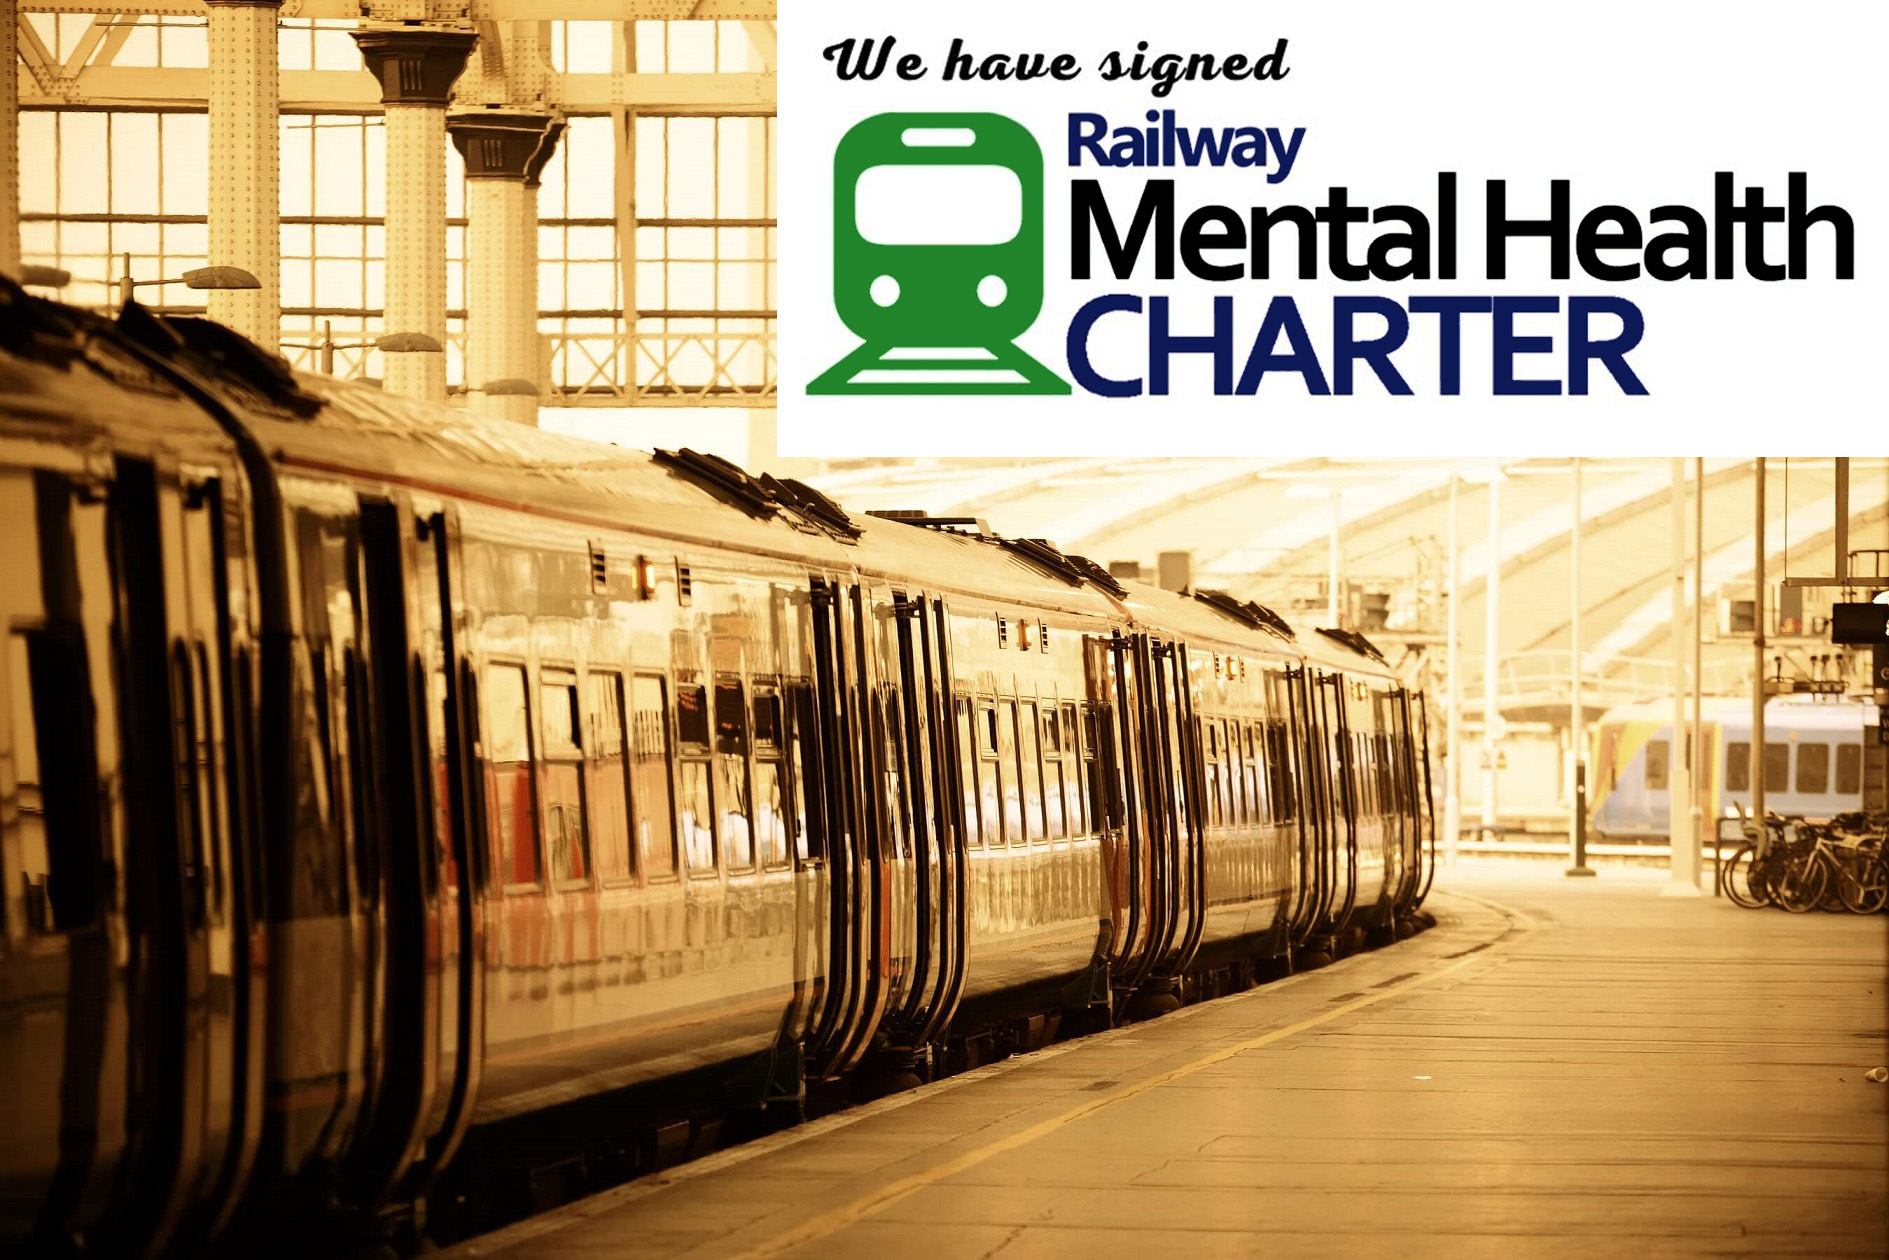 Railway Mental Health Charter signed wellbeing in rail industry